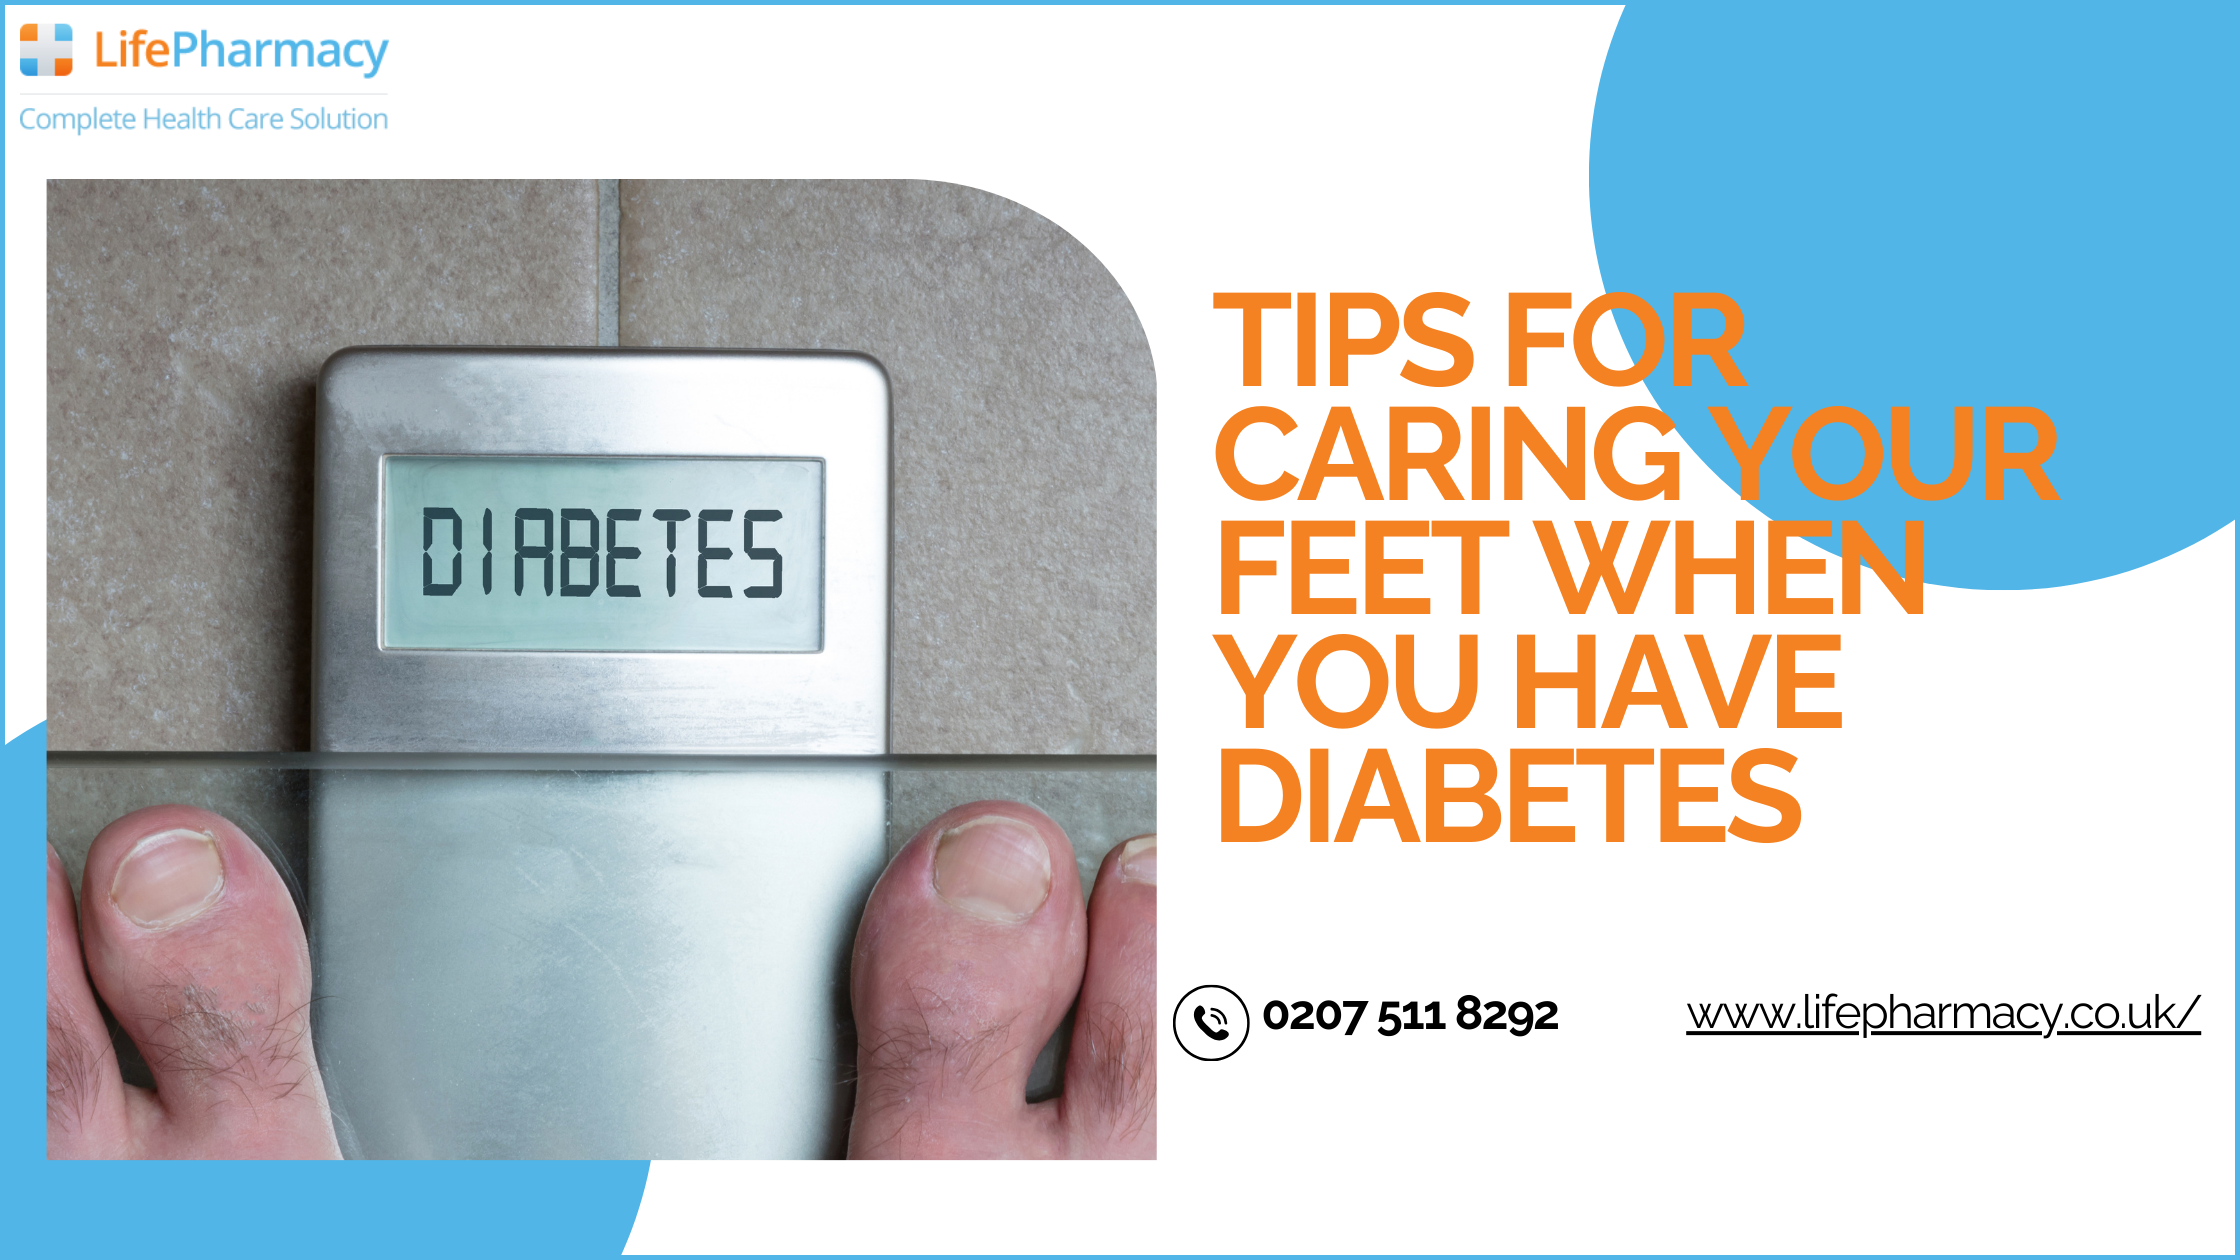 Tips for Caring Your Feet When You Have Diabetes